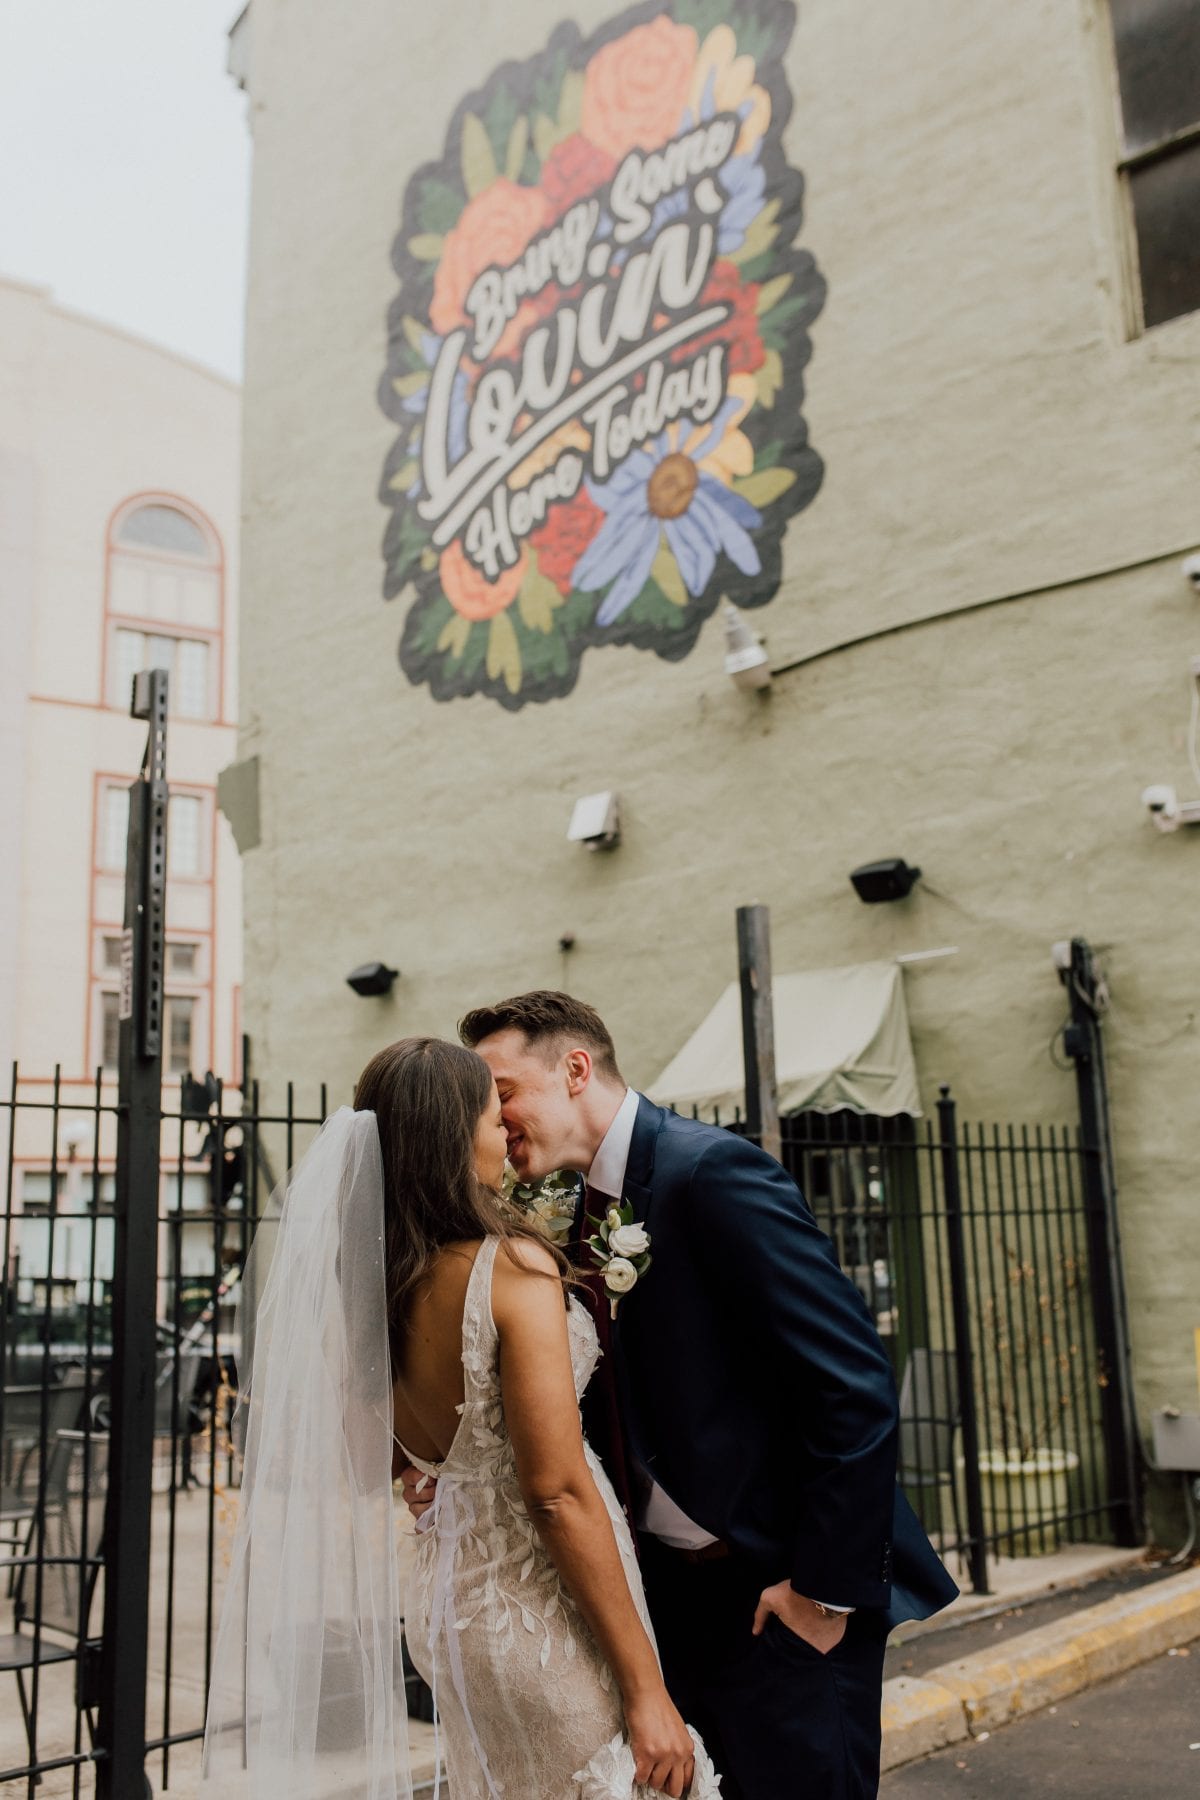 Bride and groom kiss in front of sign